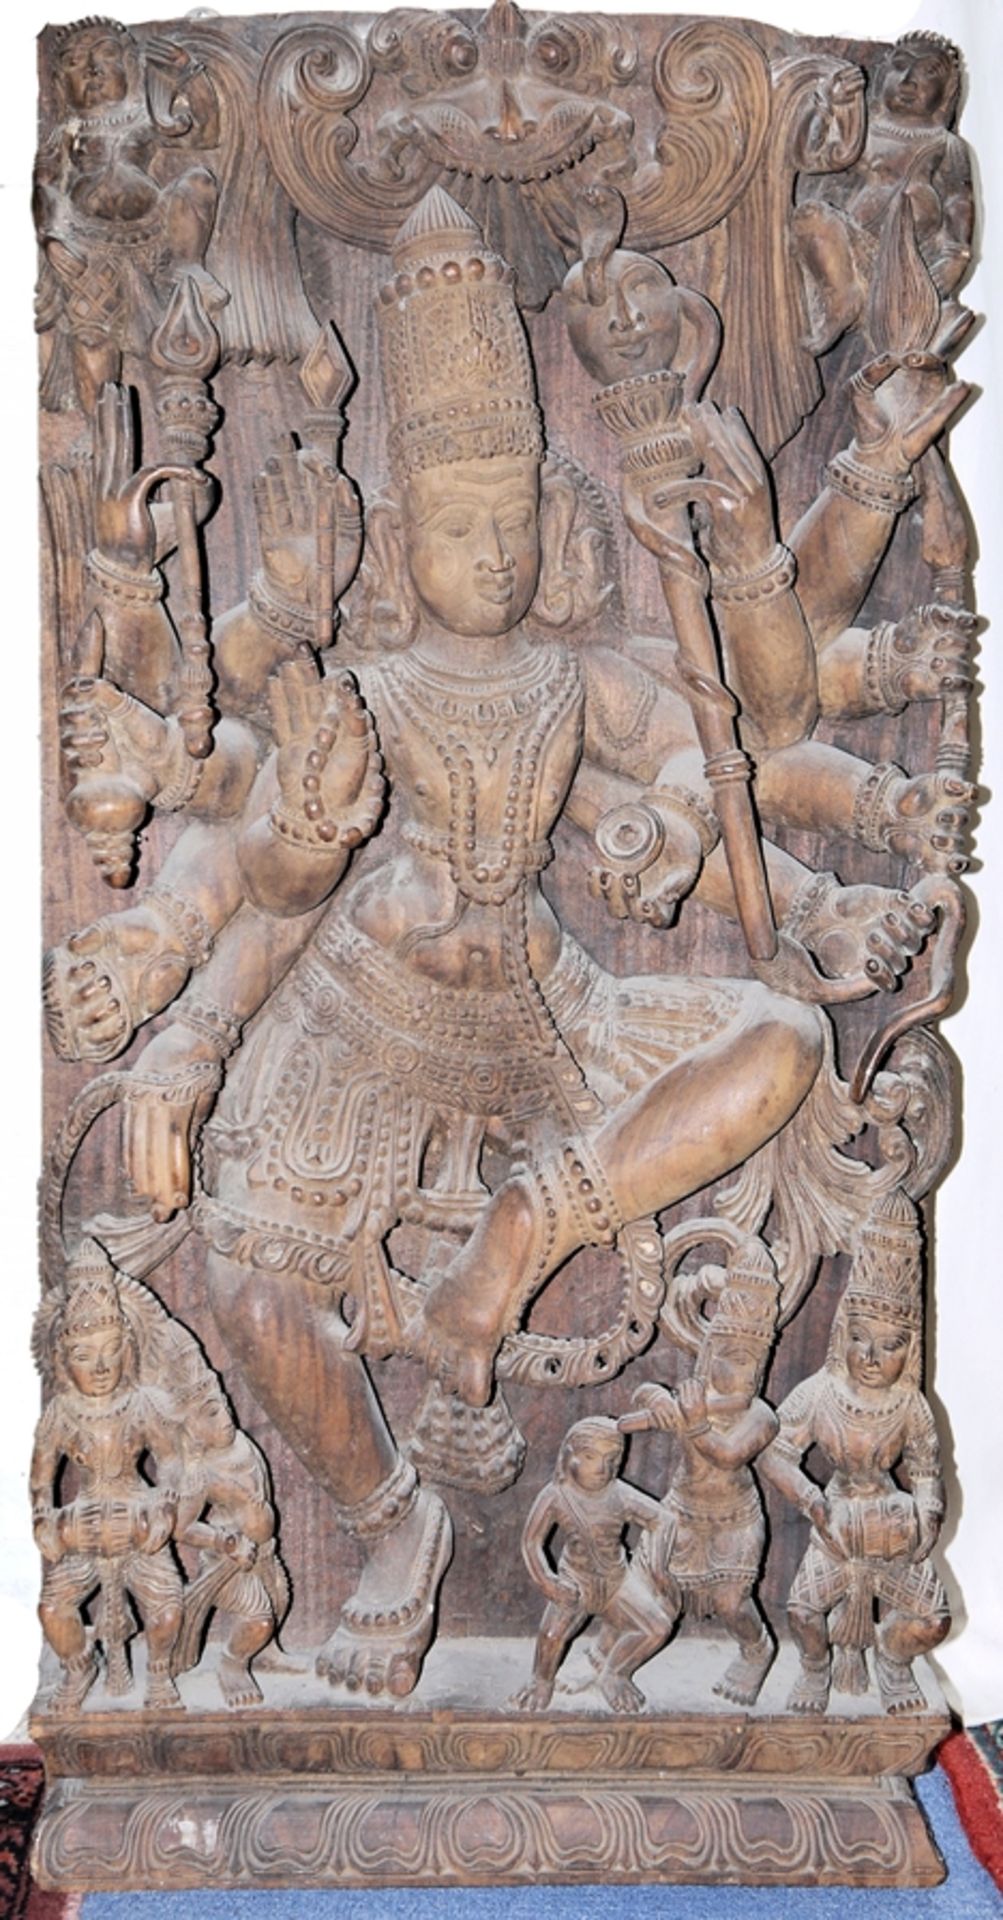 The god Shiva as a dancer, large relief carving, South India 20th century